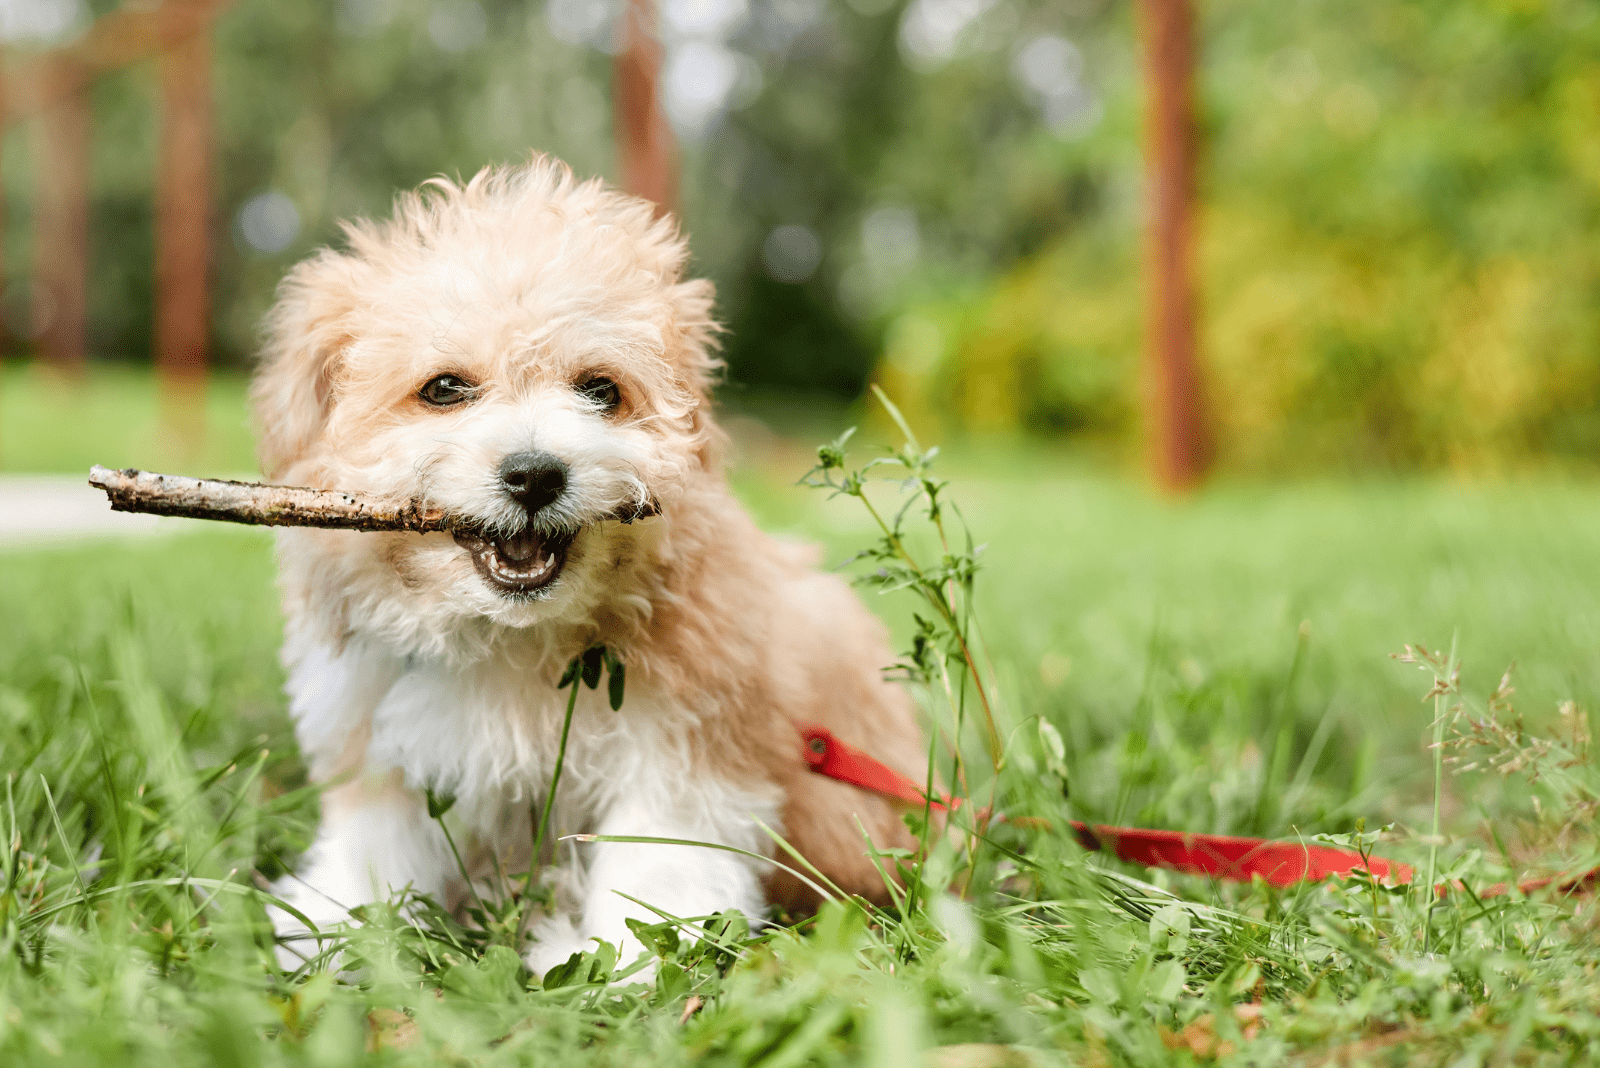 Maltipoo puppy holds a twig in its mouth